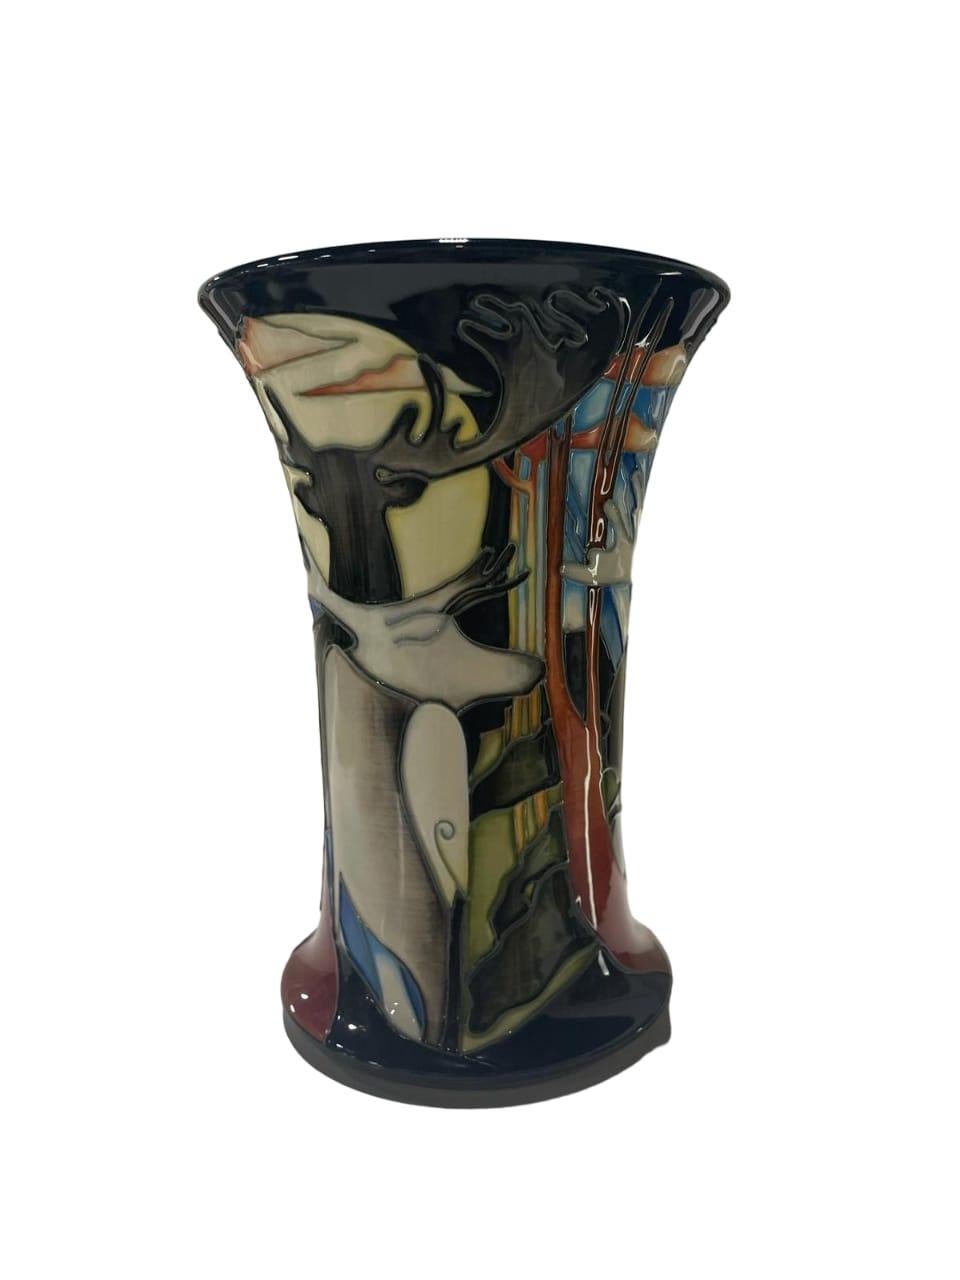 LIMITED EDITION MOORCROFT Wapiti vase by Emma Bossons dated 2012 31/35 For Sale 4